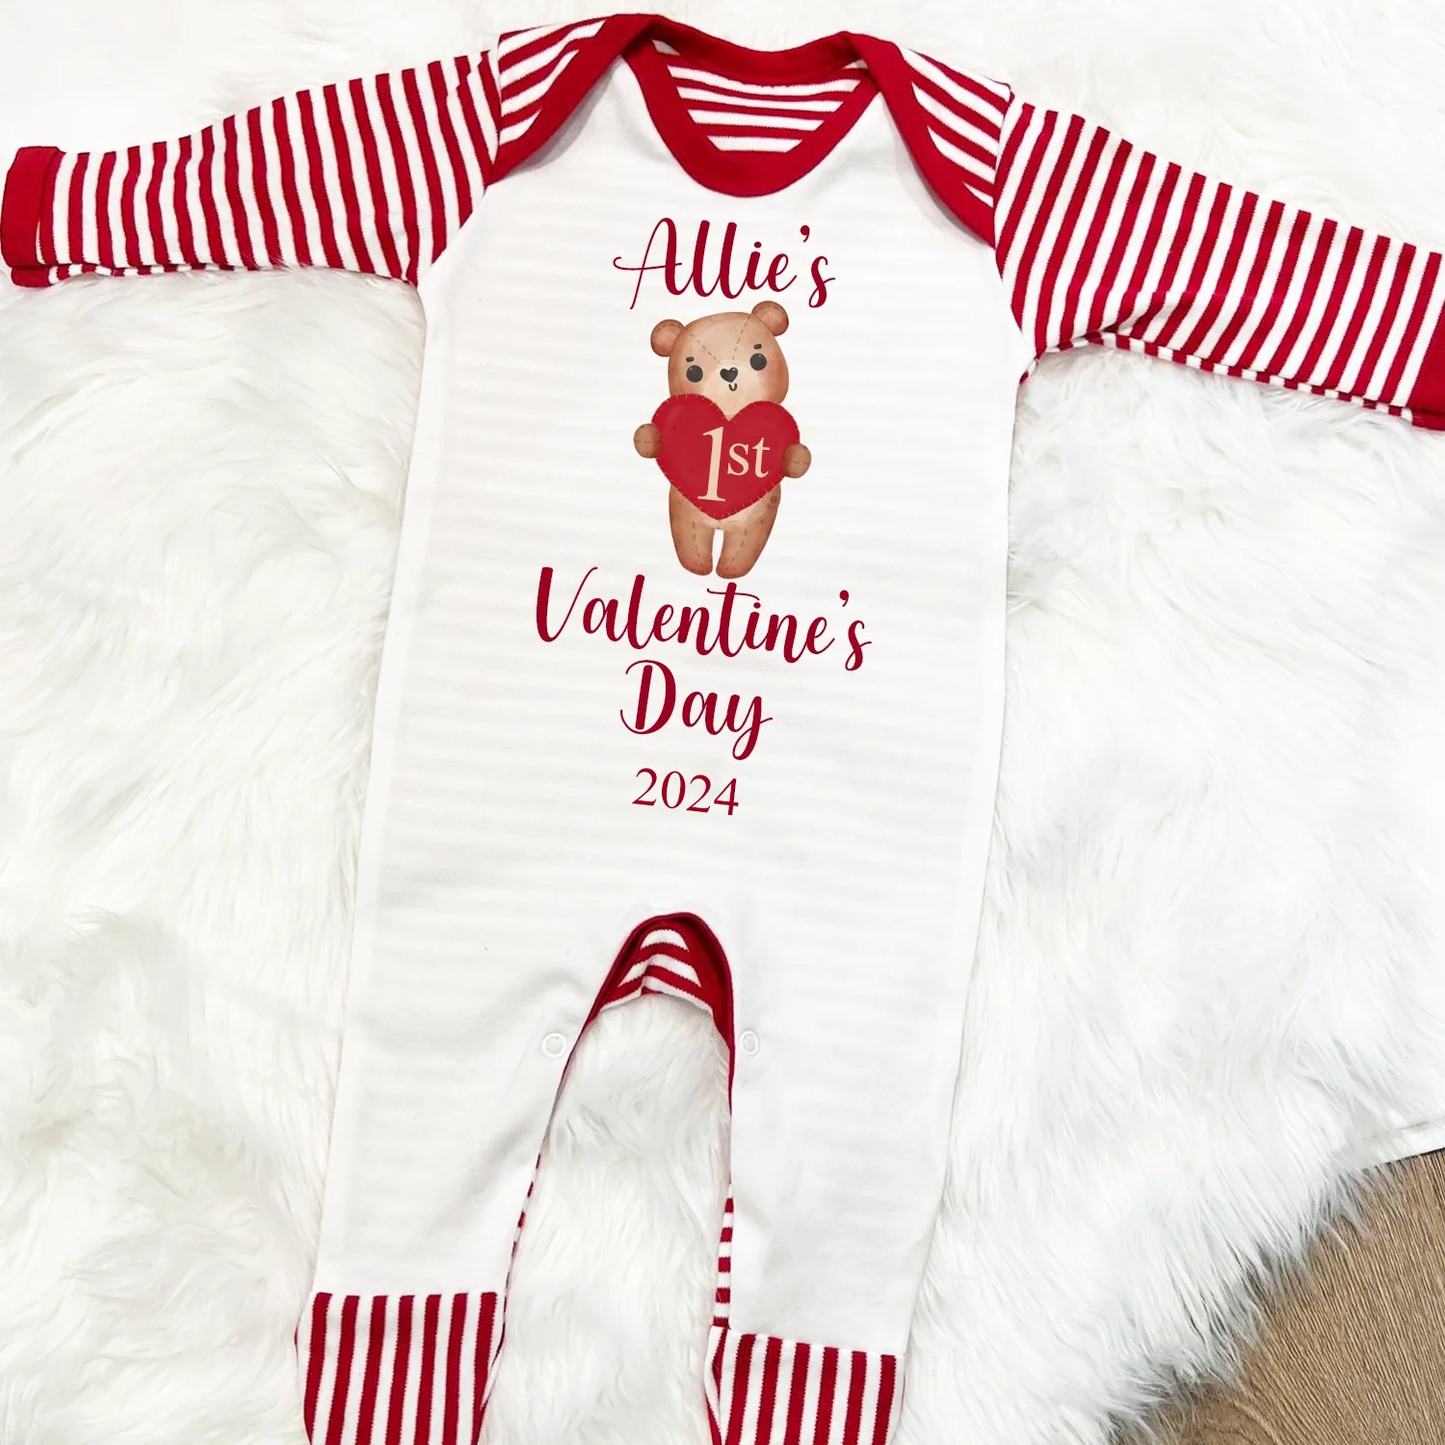 My 1st Valentine's Day - Personalised Baby Sleepsuit - Bear Heart Design